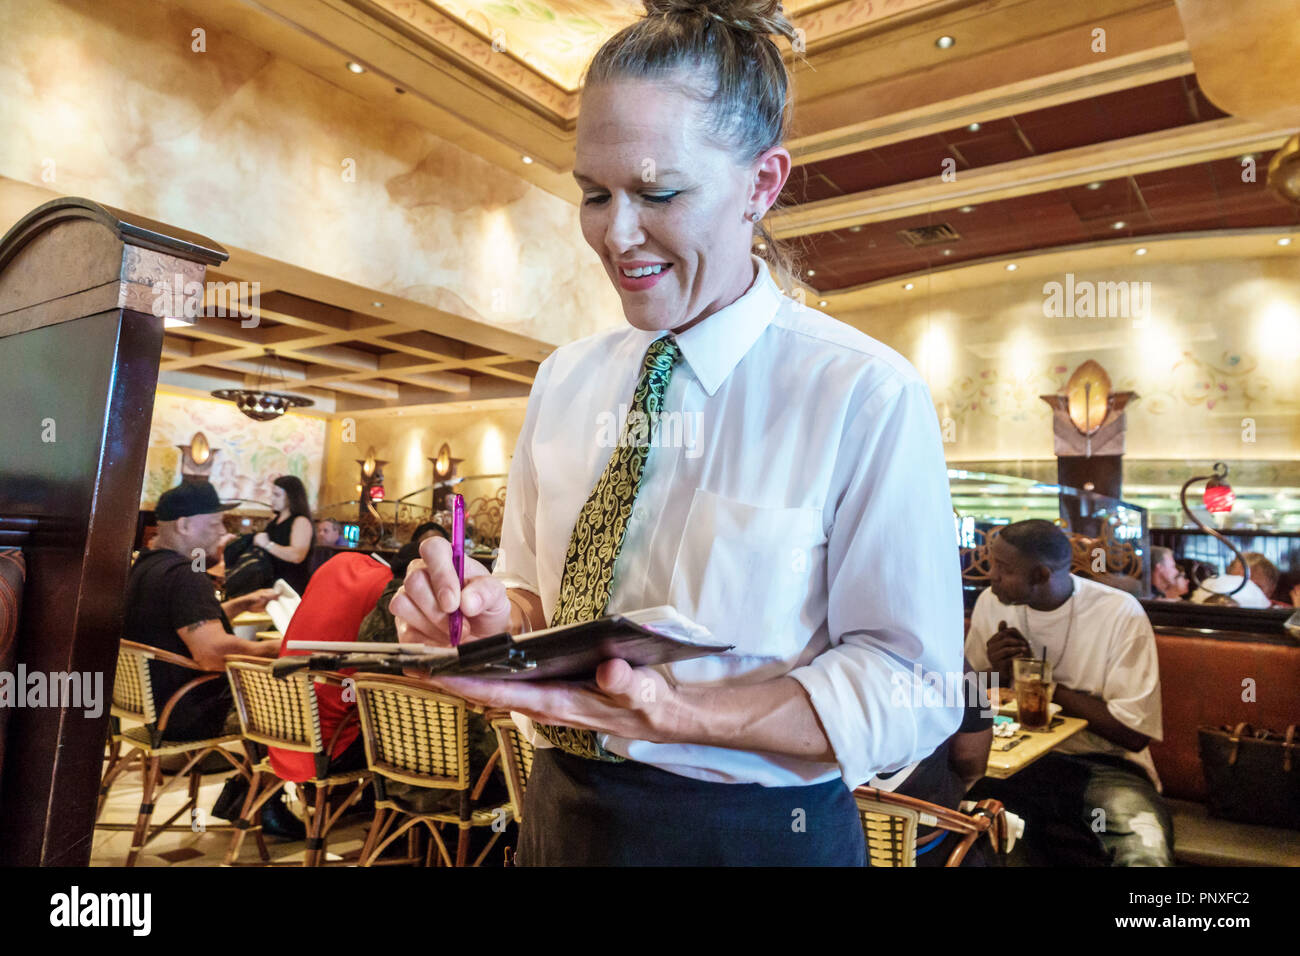 West Palm Beach Florida,City Place CityPlace,Cheesecake Factory,restaurant restaurants food dining cafe cafes,interior inside,woman female women,waite Stock Photo